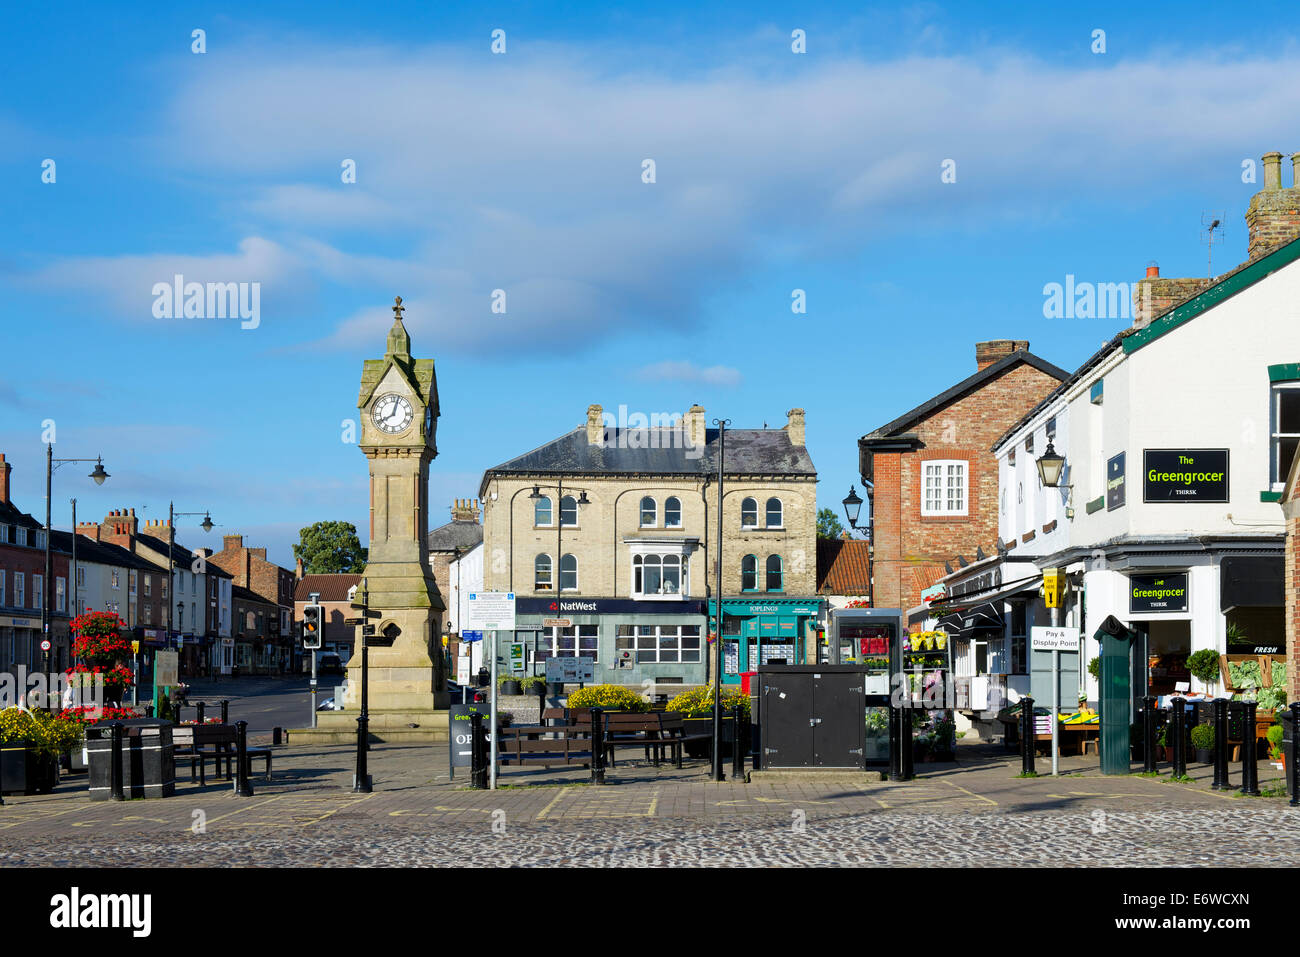 The market place in Thirsk, North Yorkshire, England UK Stock Photo